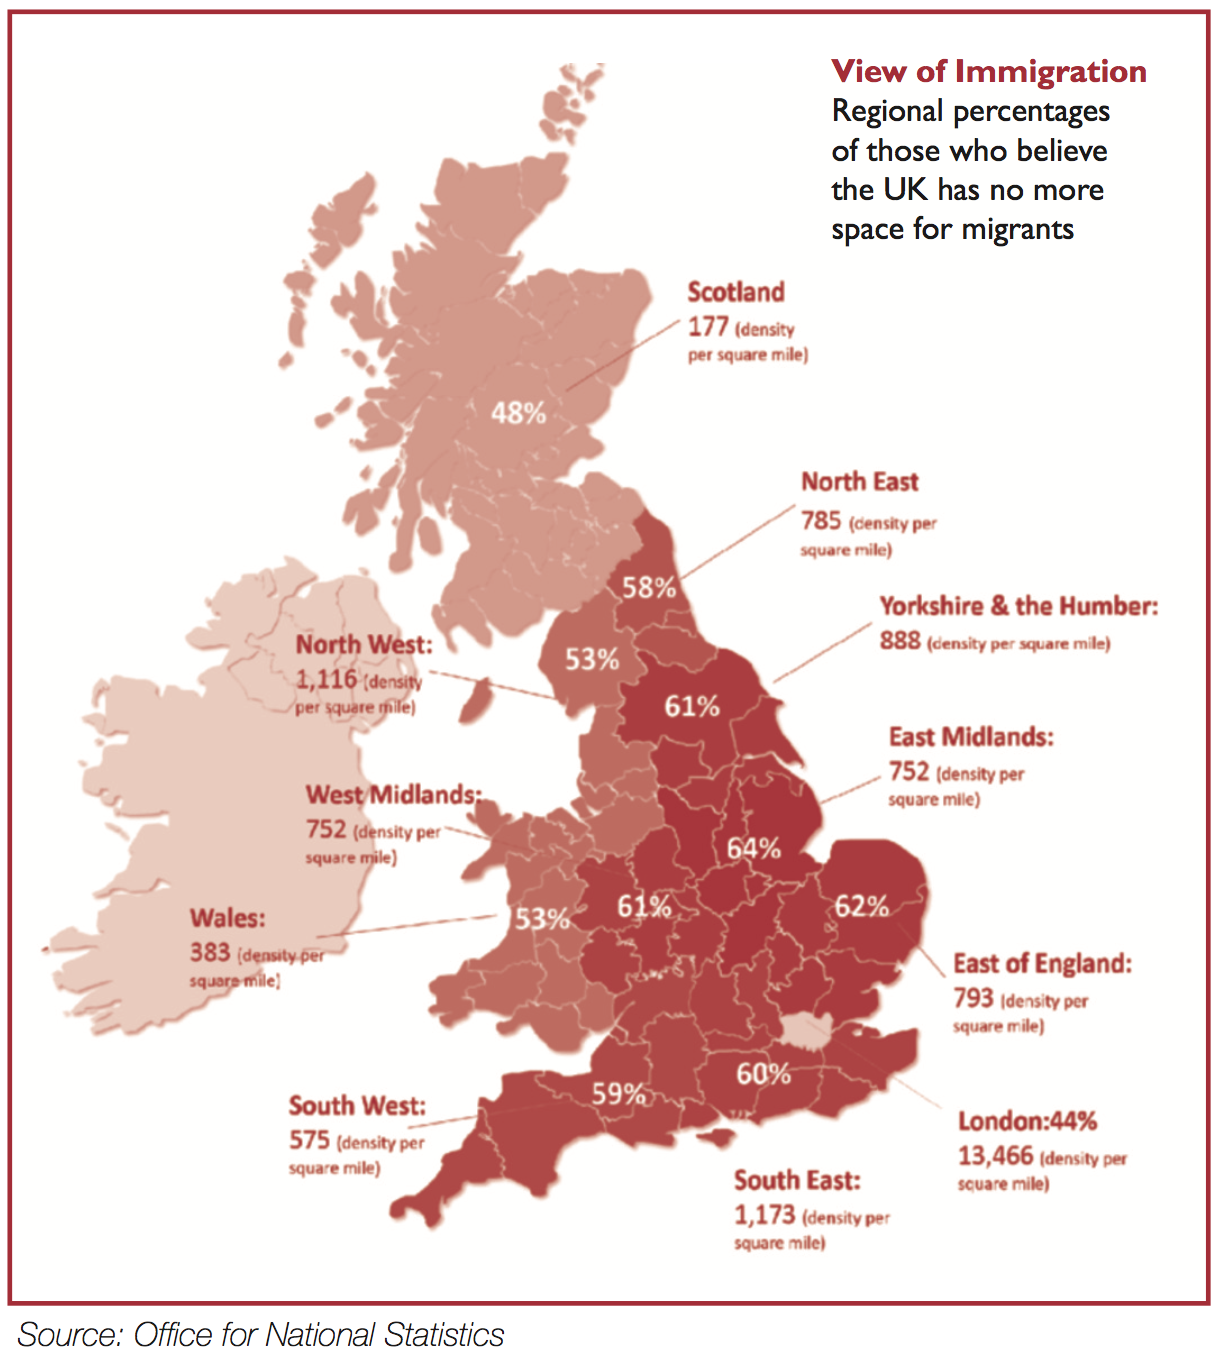 View of Immigration – Regional percentages of those who believe the UK has no more space for migrants